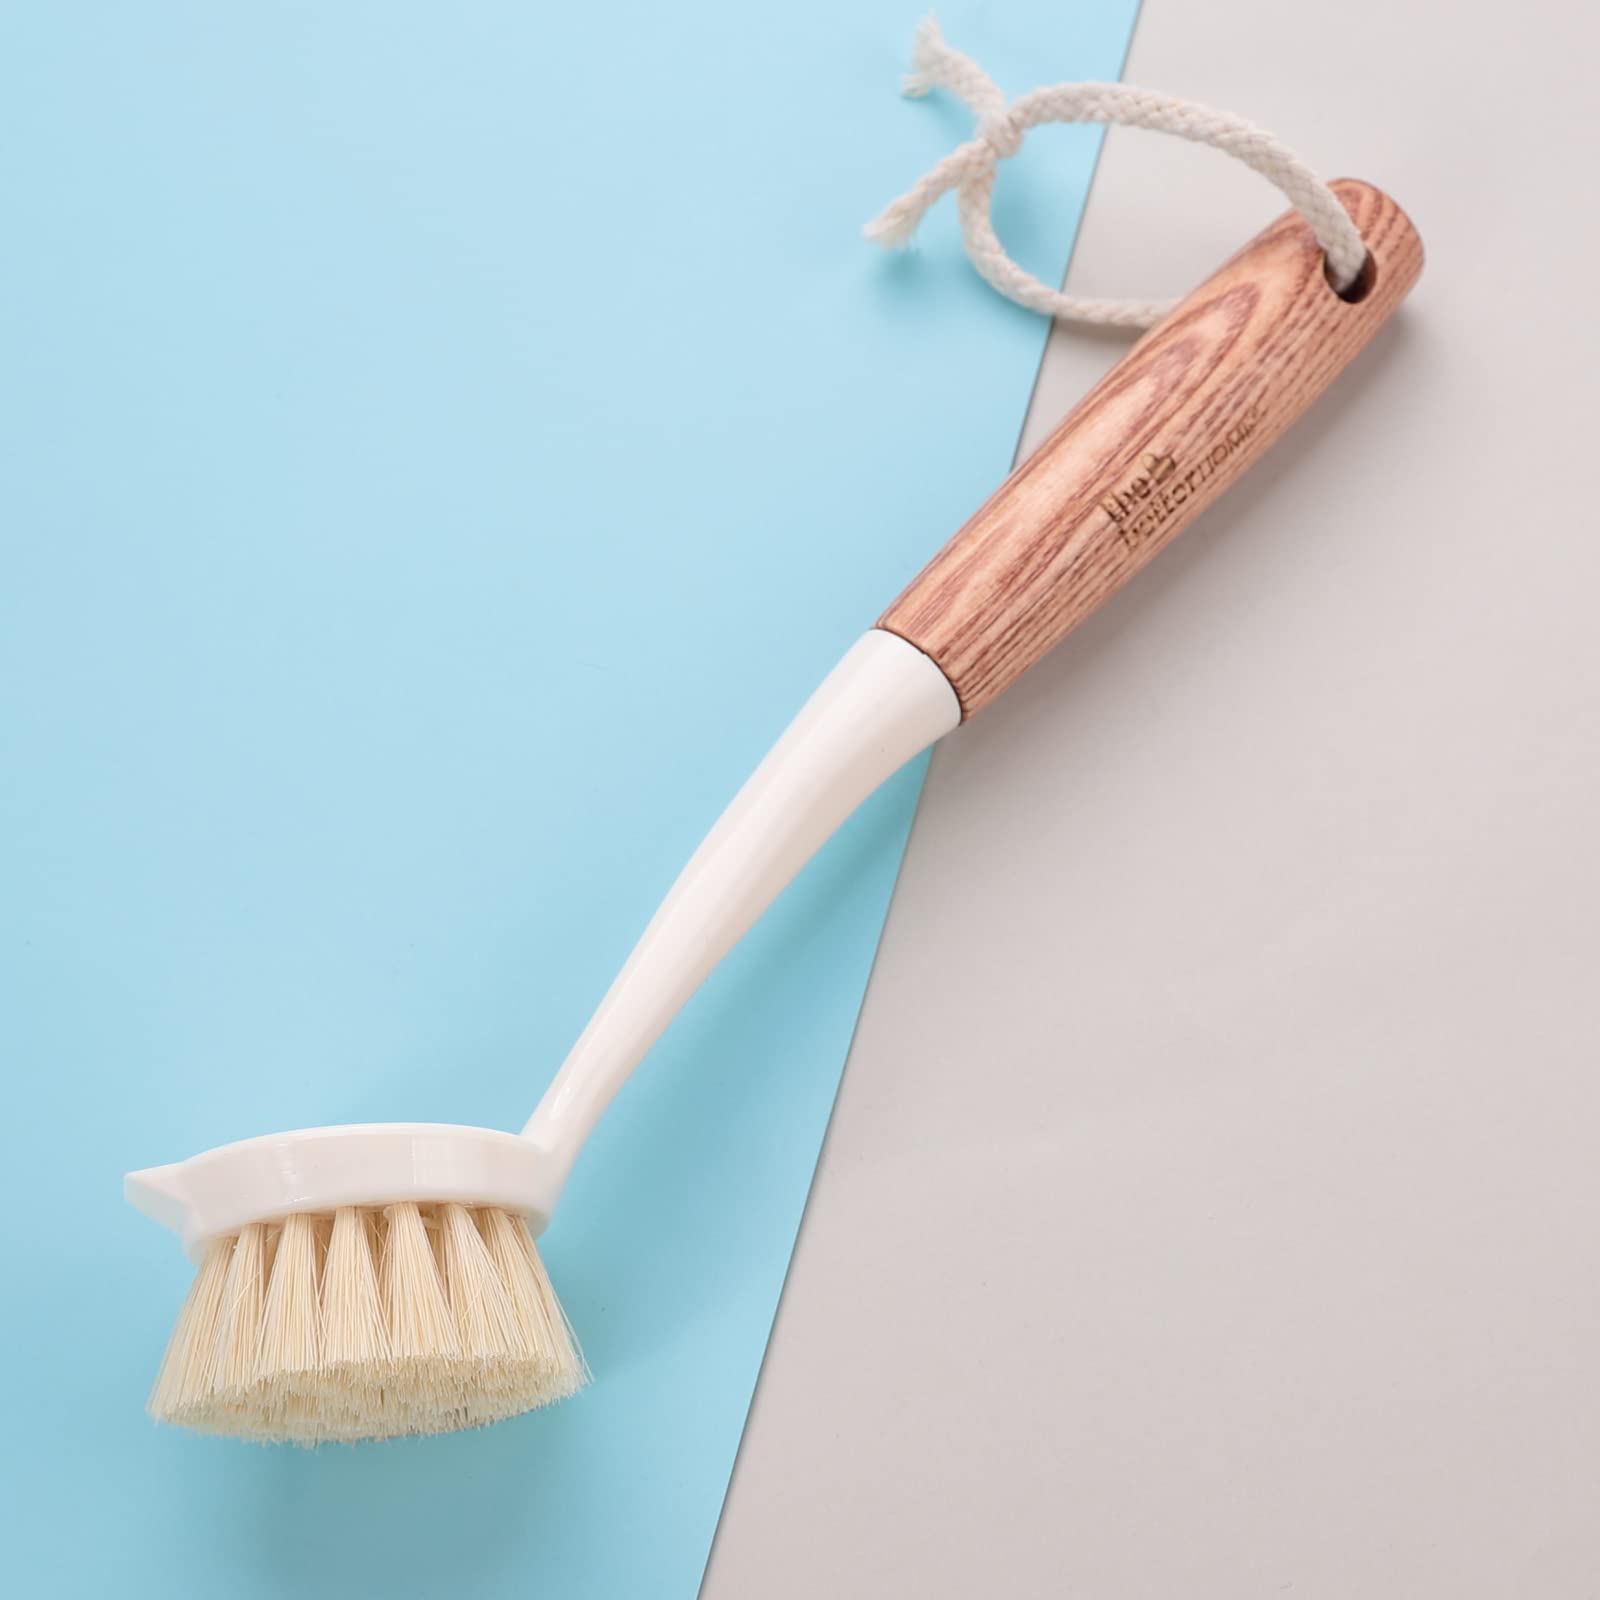  Cleaning Brushes: Home & Kitchen